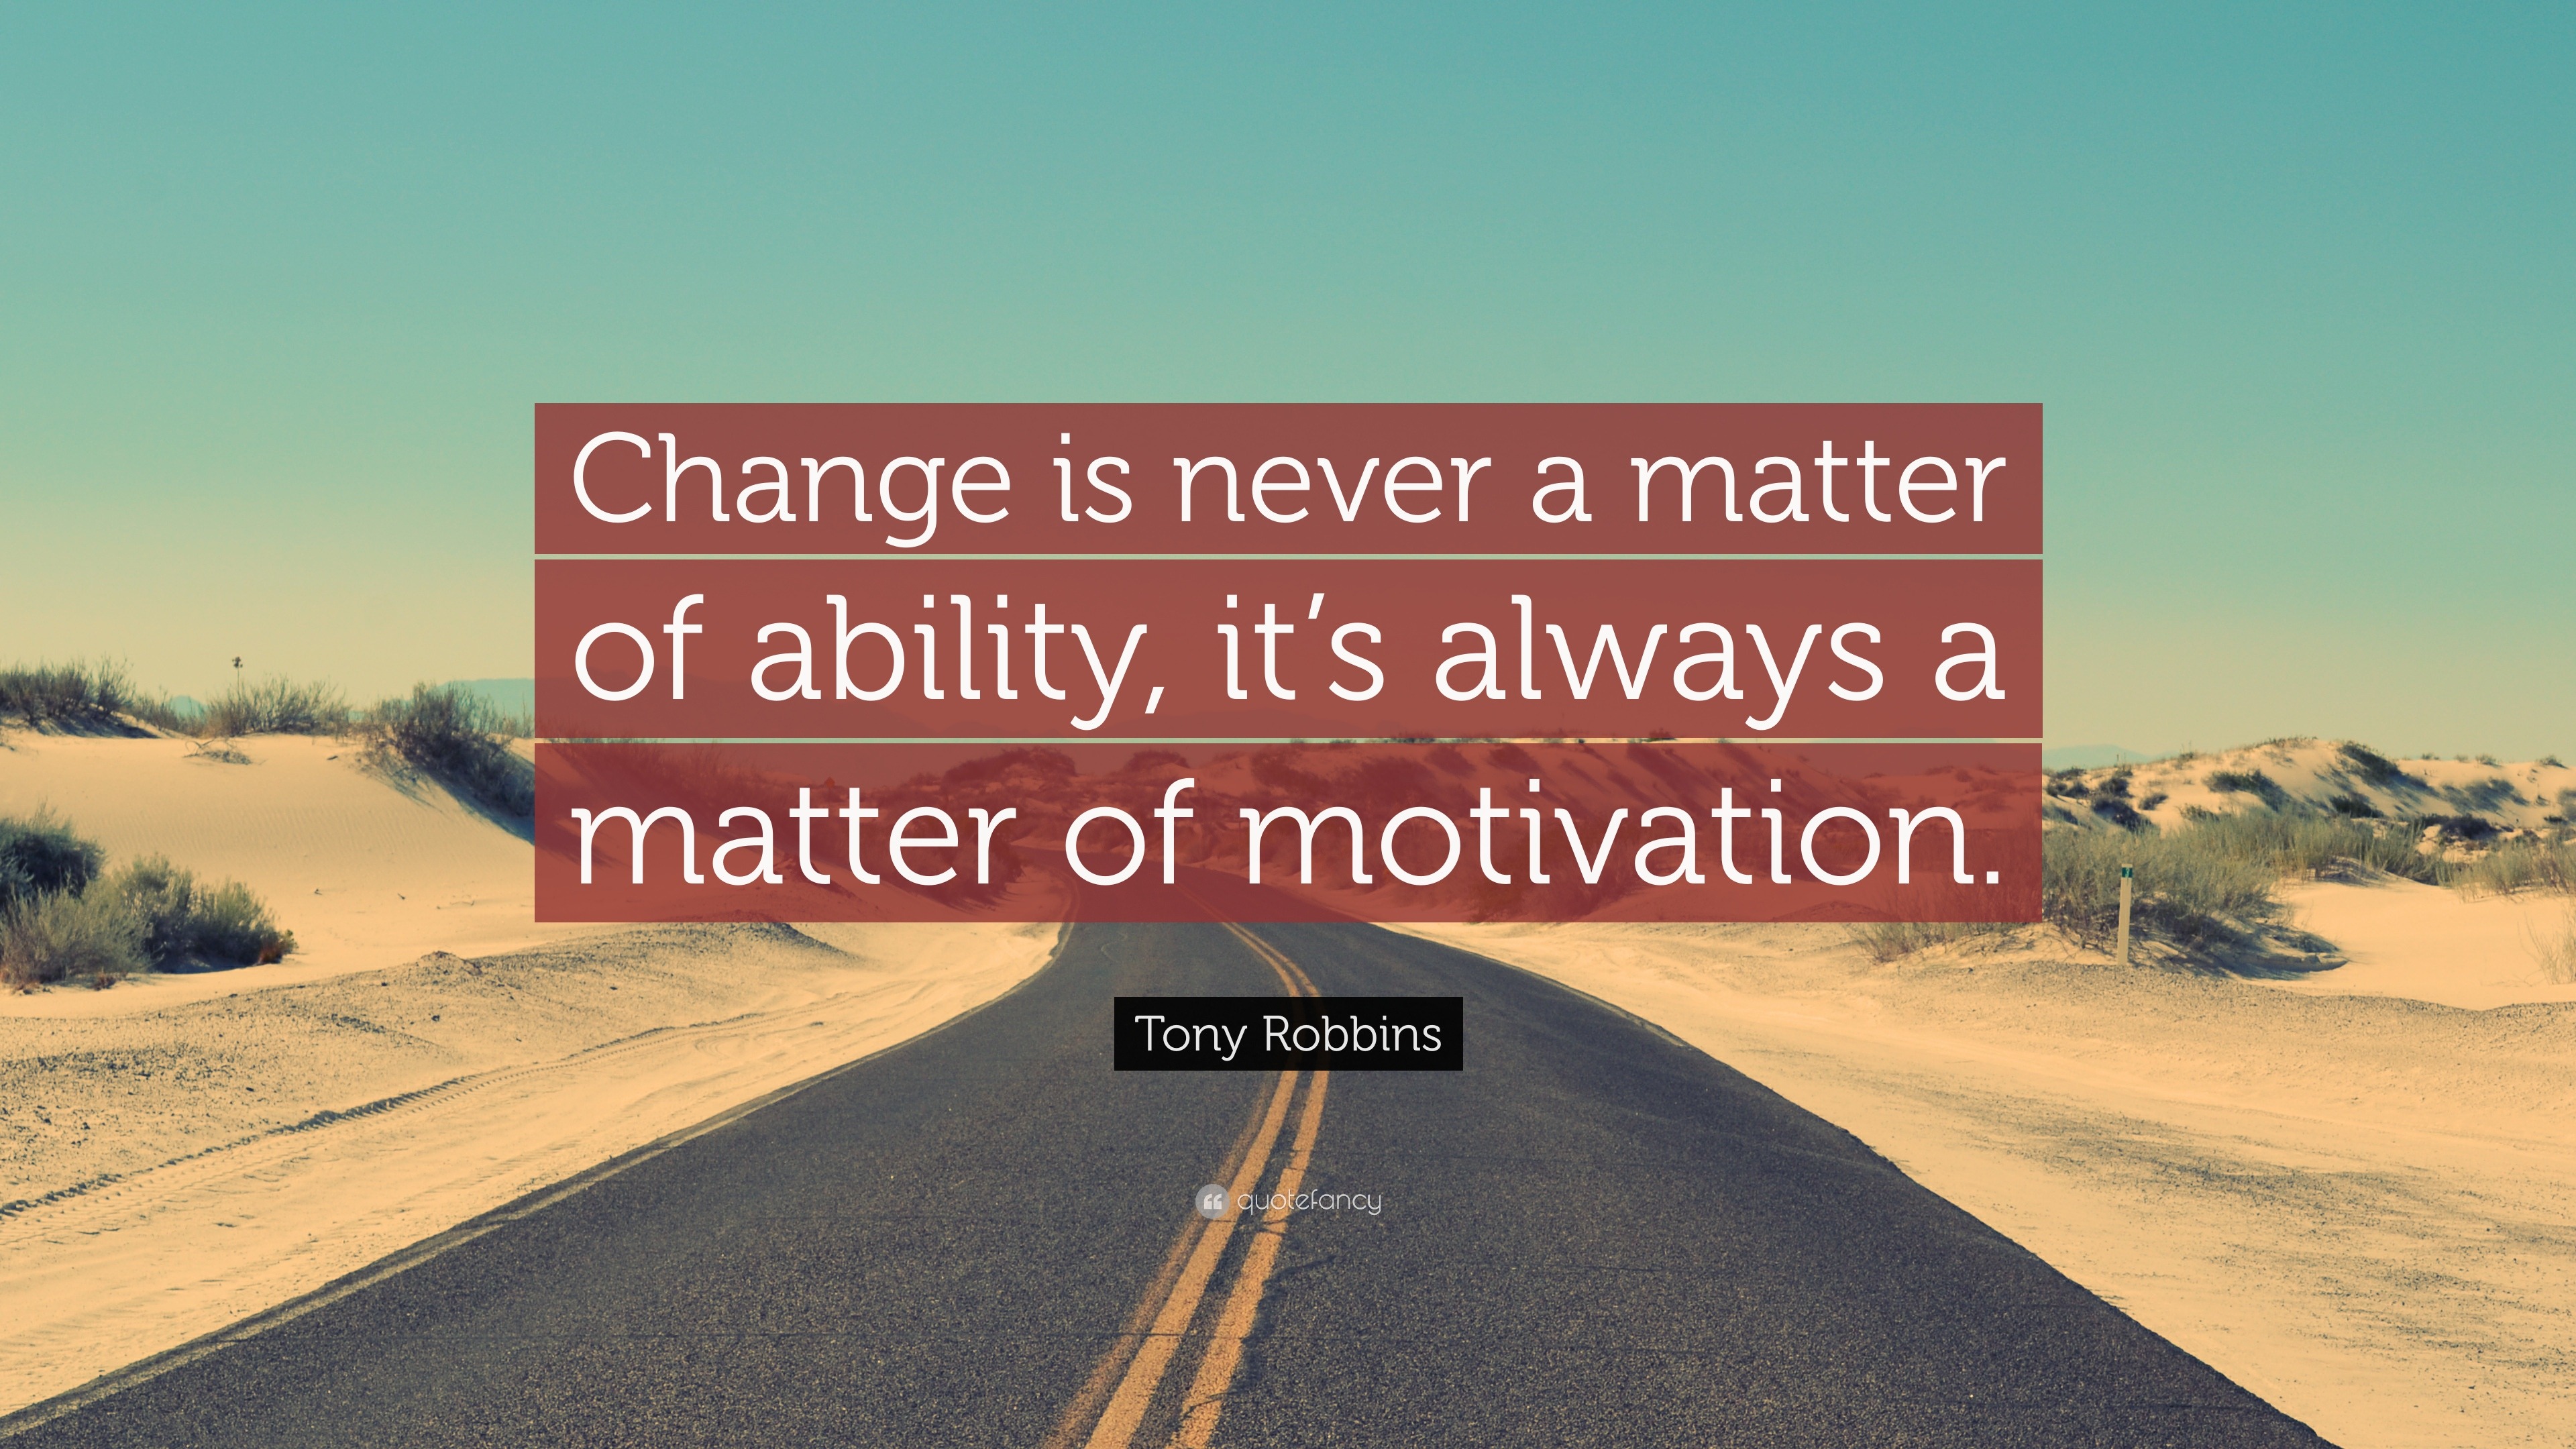 Tony Robbins Quote: “Change Is Never A Matter Of Ability, It’s Always A